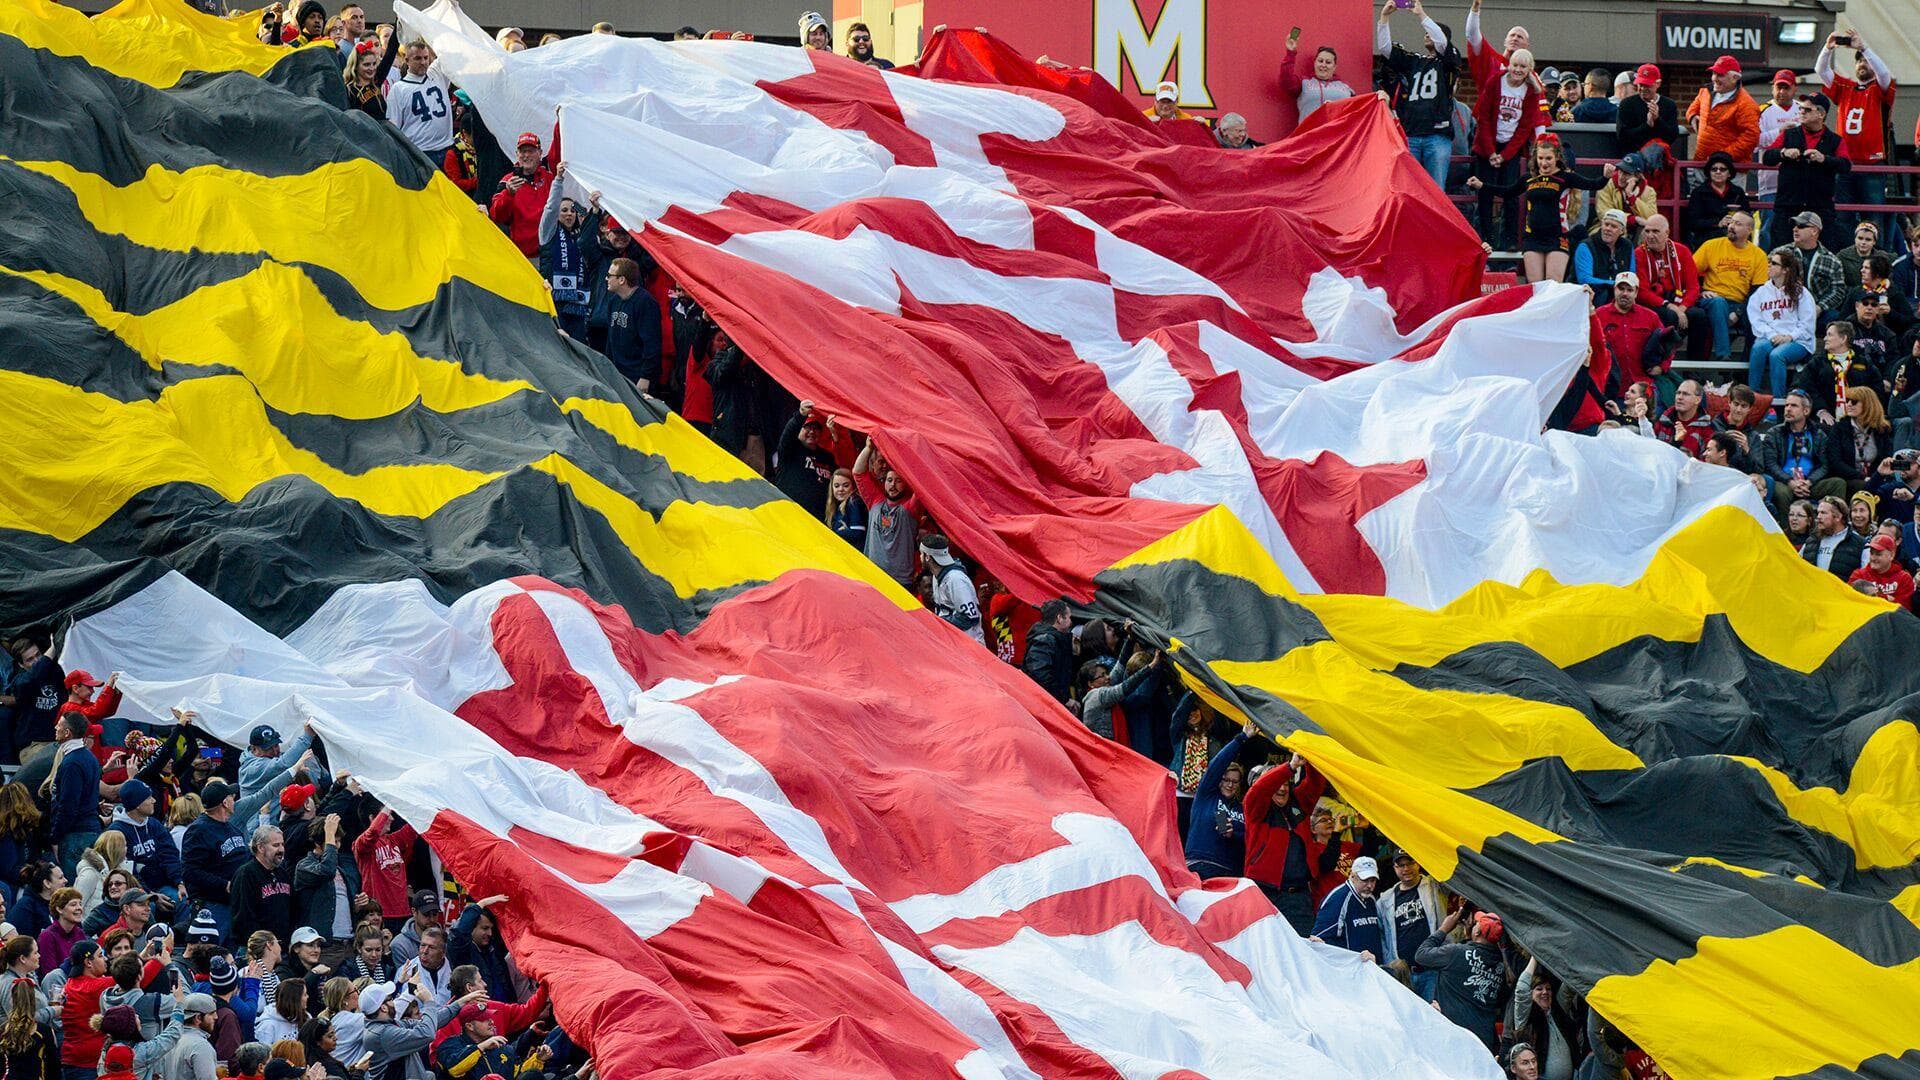 Two huge banners depicting both halfs of the Maryland flag are unfurled over and held up by the crowd of spectators at the University of Maryland home-game at Maryland Stadium